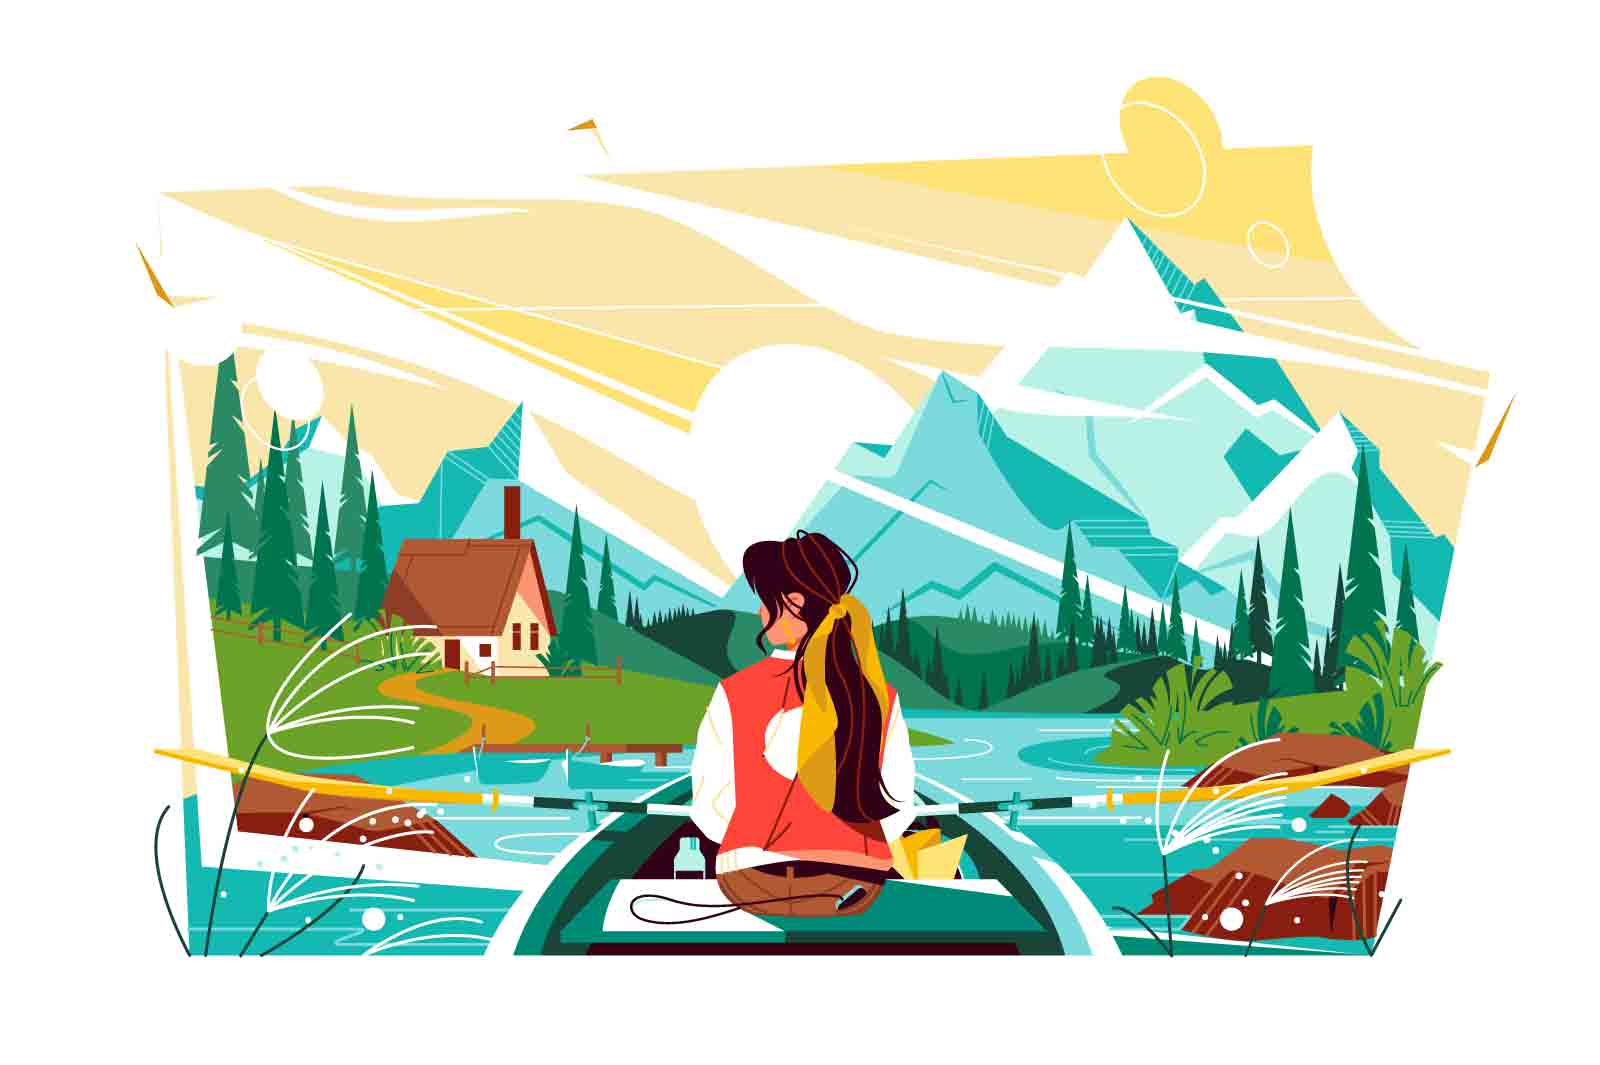 Girl boating on lake, picturesque mountain landscape vector illustration. Lake boat forest scene flat style concept. Travelling idea